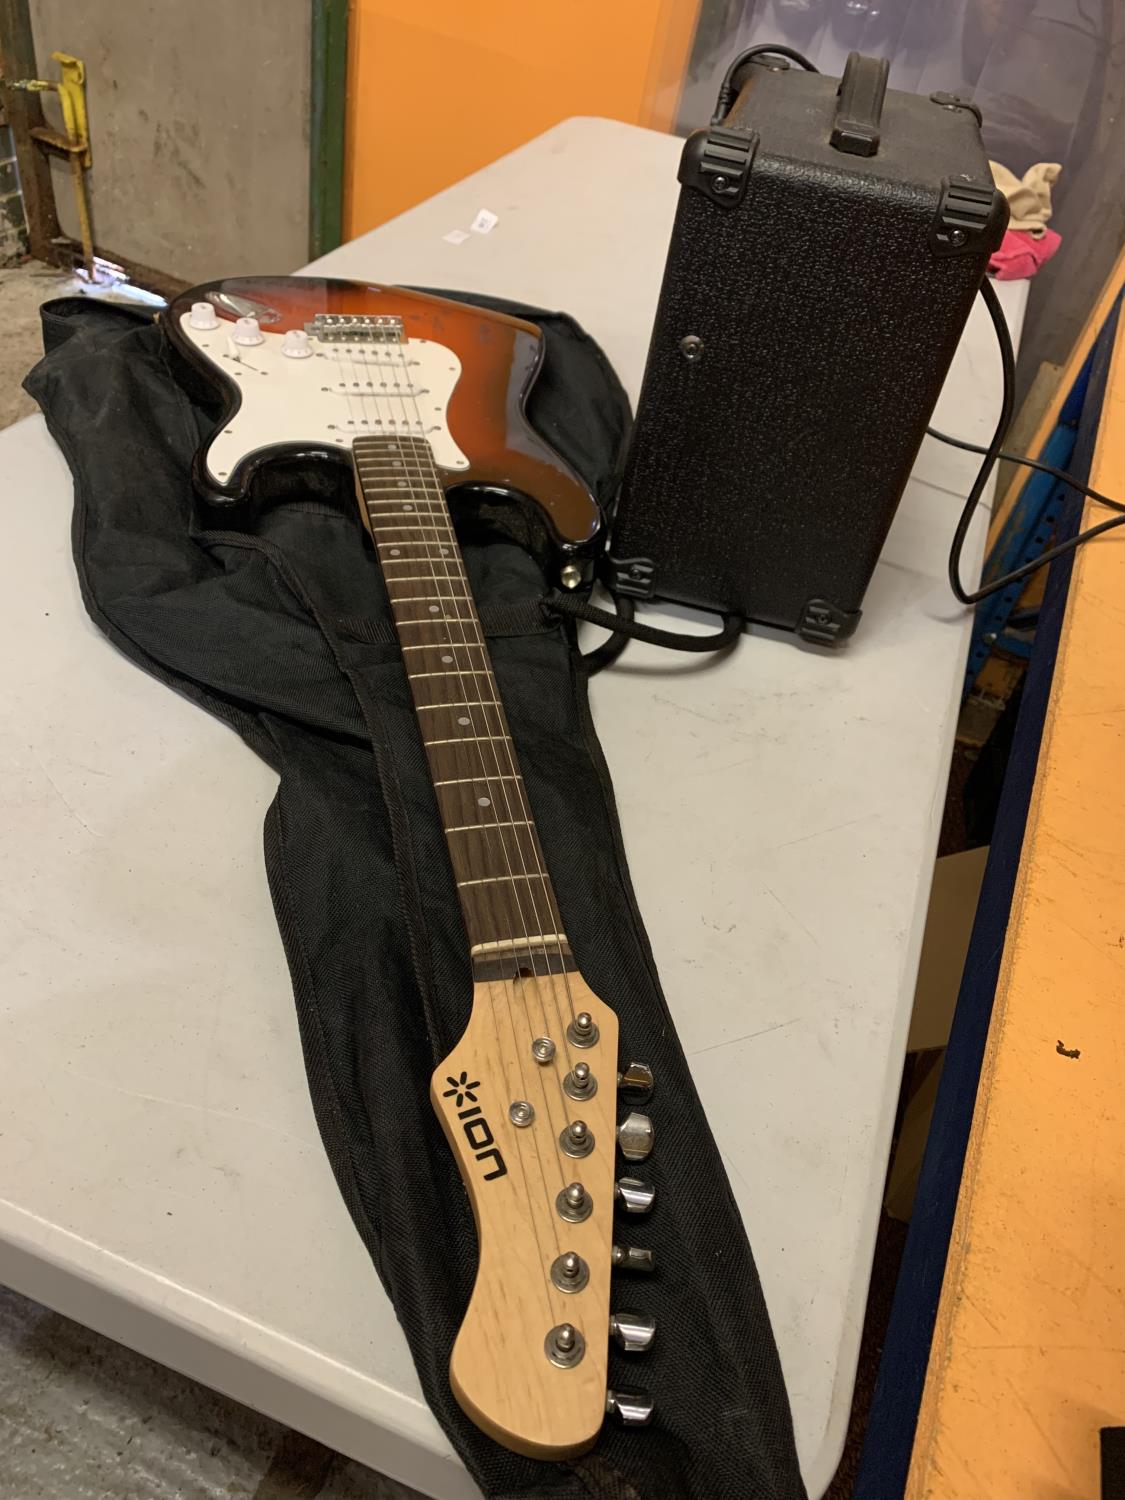 AN ION ELECTRIC GUITAR WITH CARRYING CASE AND AMPLIFIER - Image 5 of 5